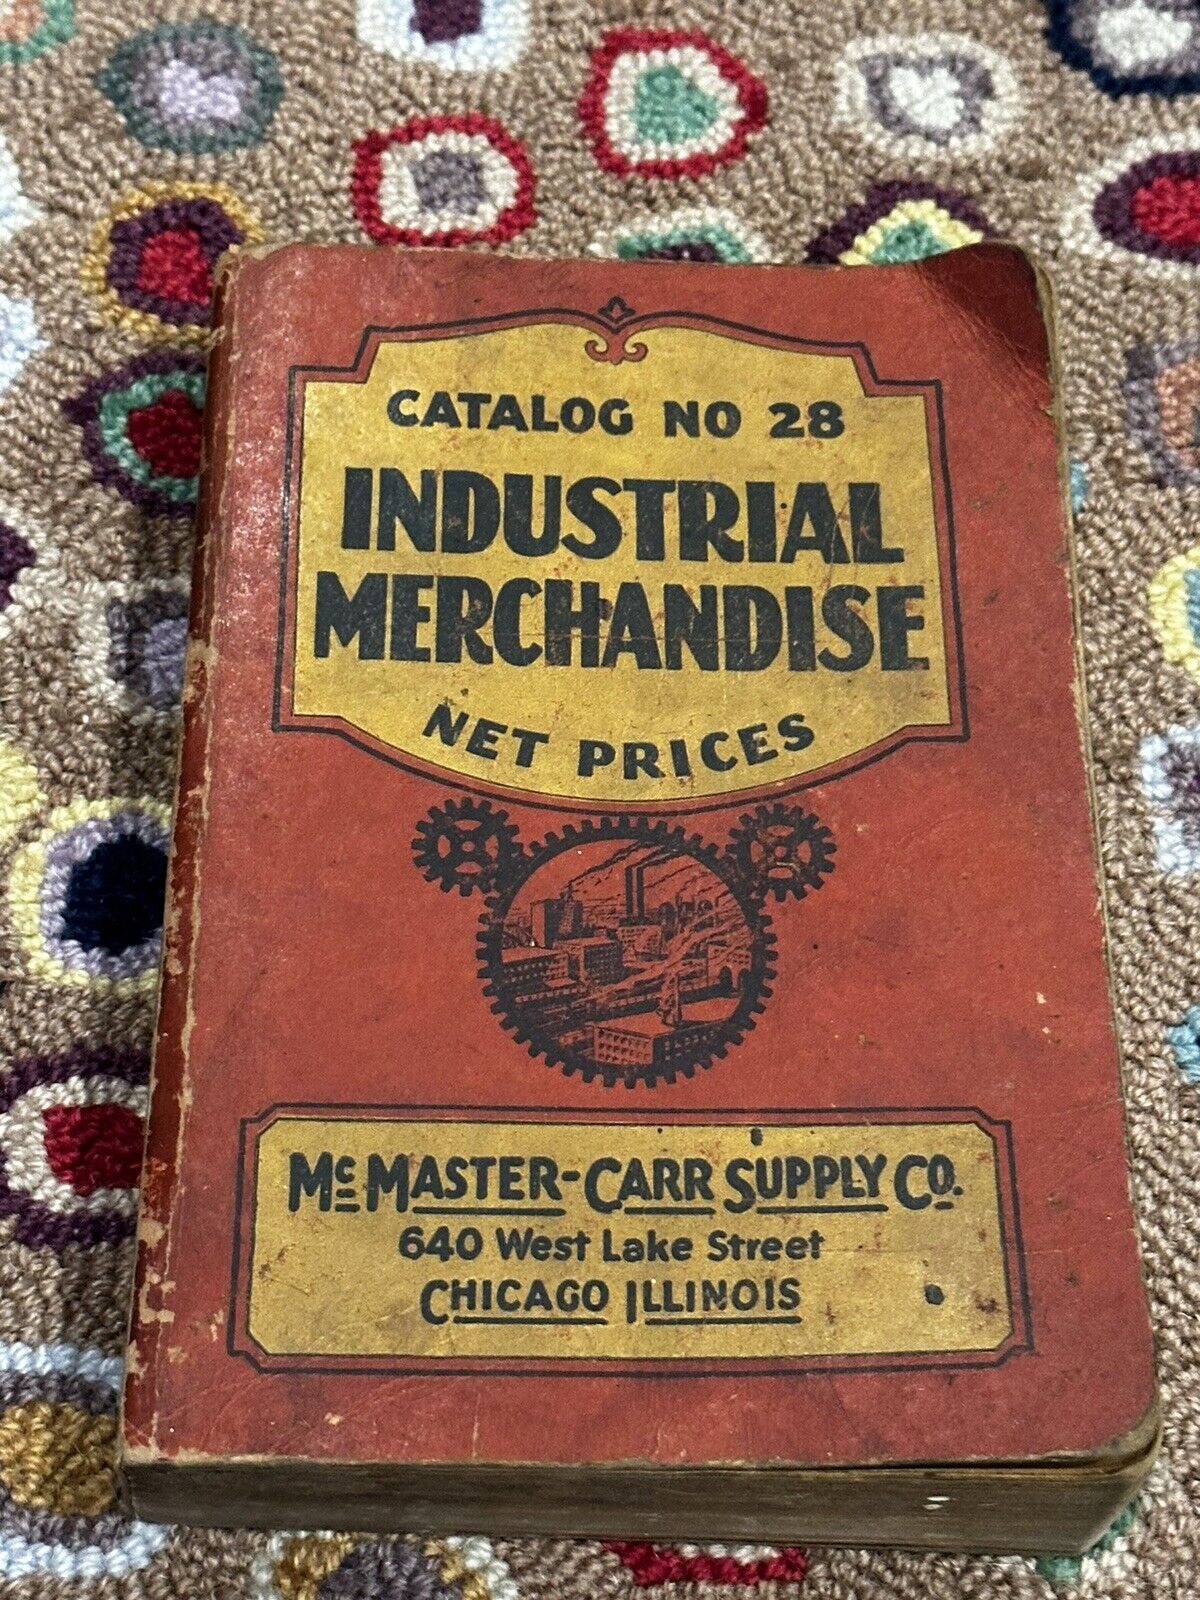 MCMASTER -CARR SUPPLY CO CHICAGO ILL CATALOG 28 1928 INDUSTRIAL MDSE.  WOW